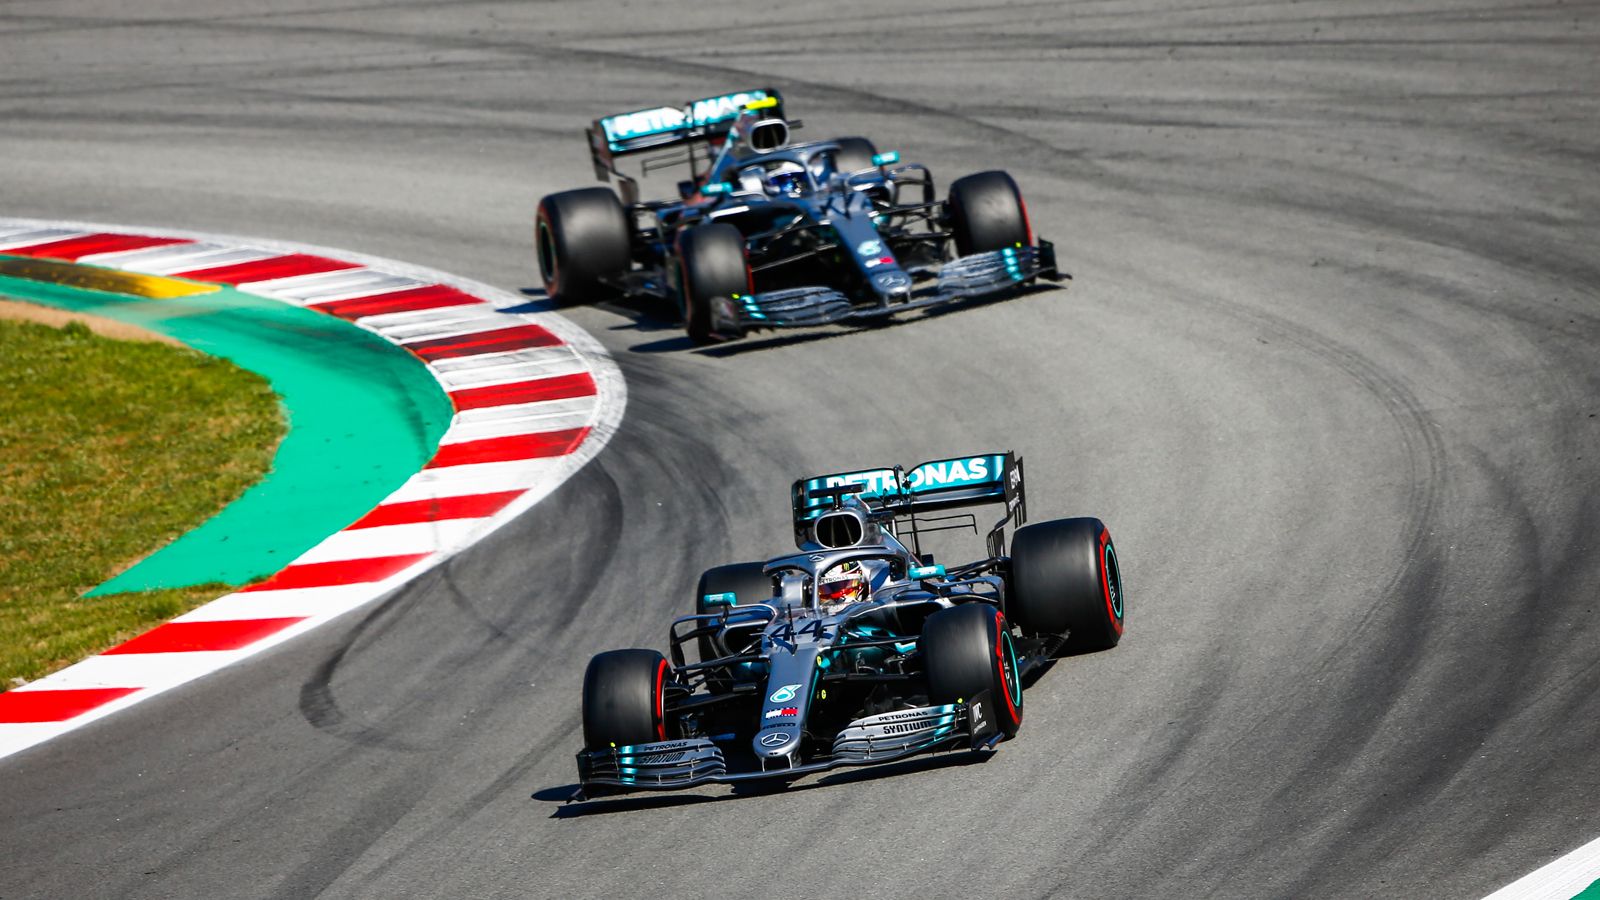 German broadcast says Mercedes dominance in F1 is hurting TV ratings